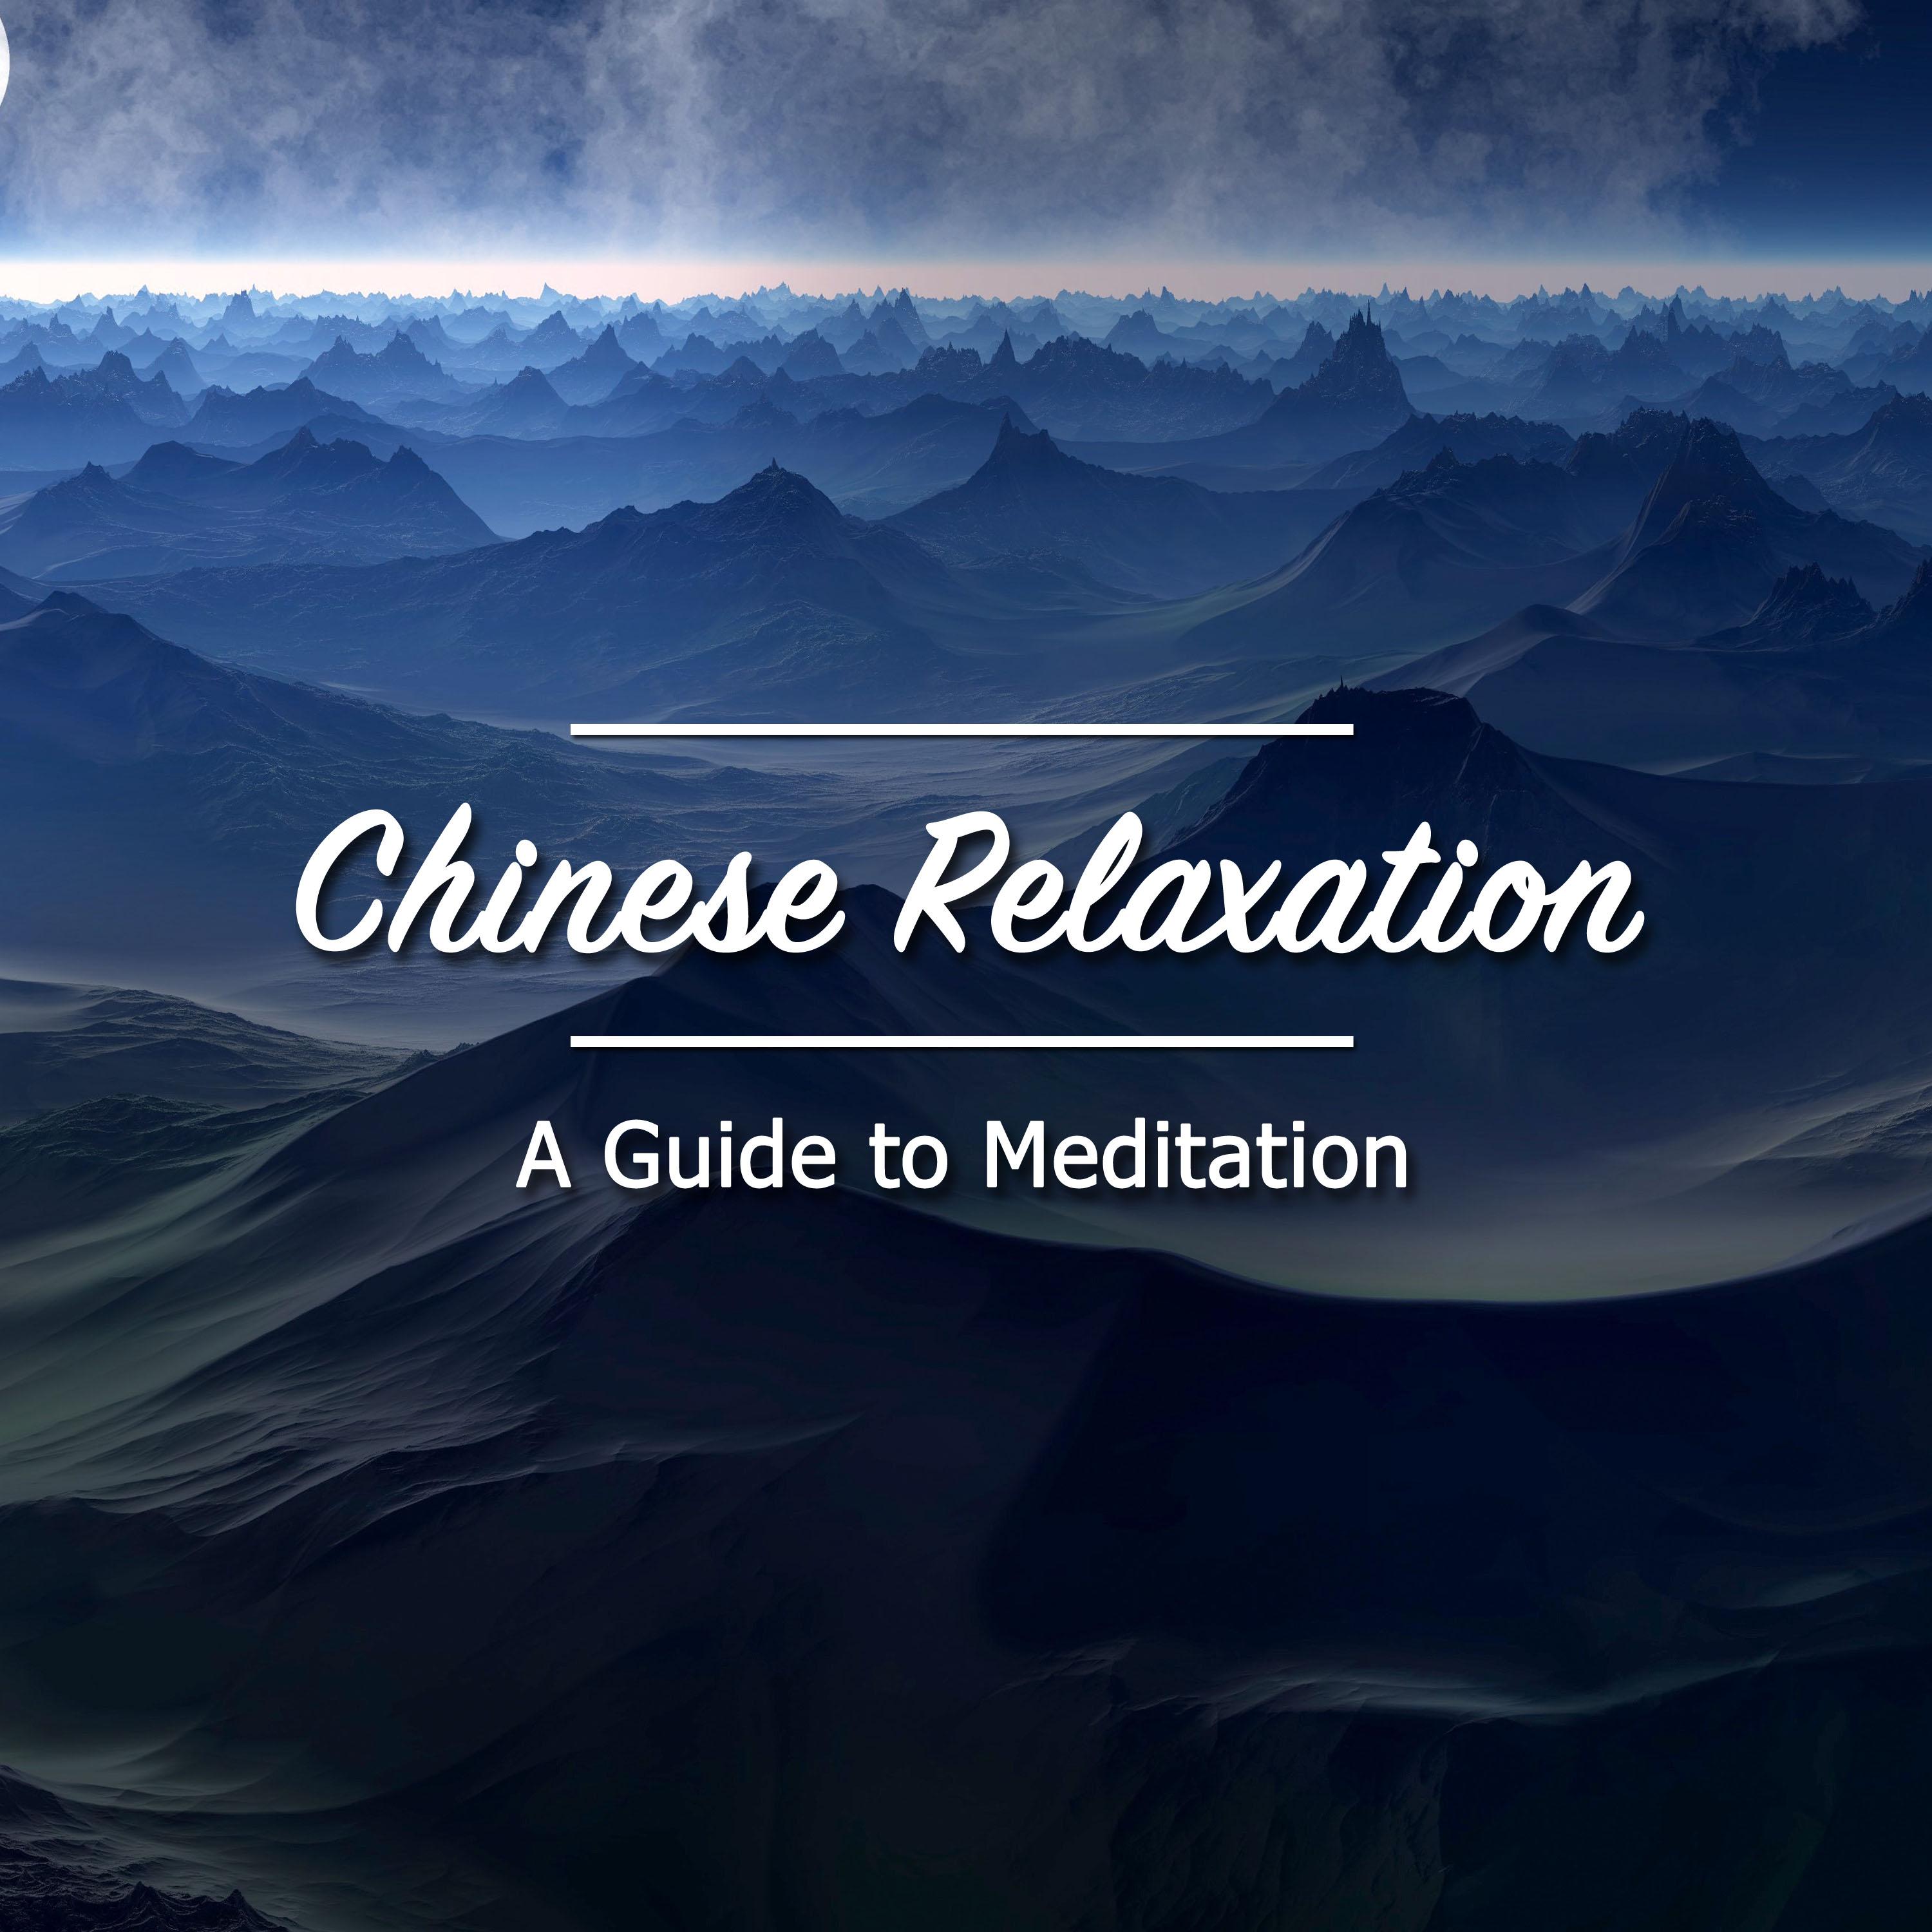 17 A Guide to Meditation: Chinese Relaxation